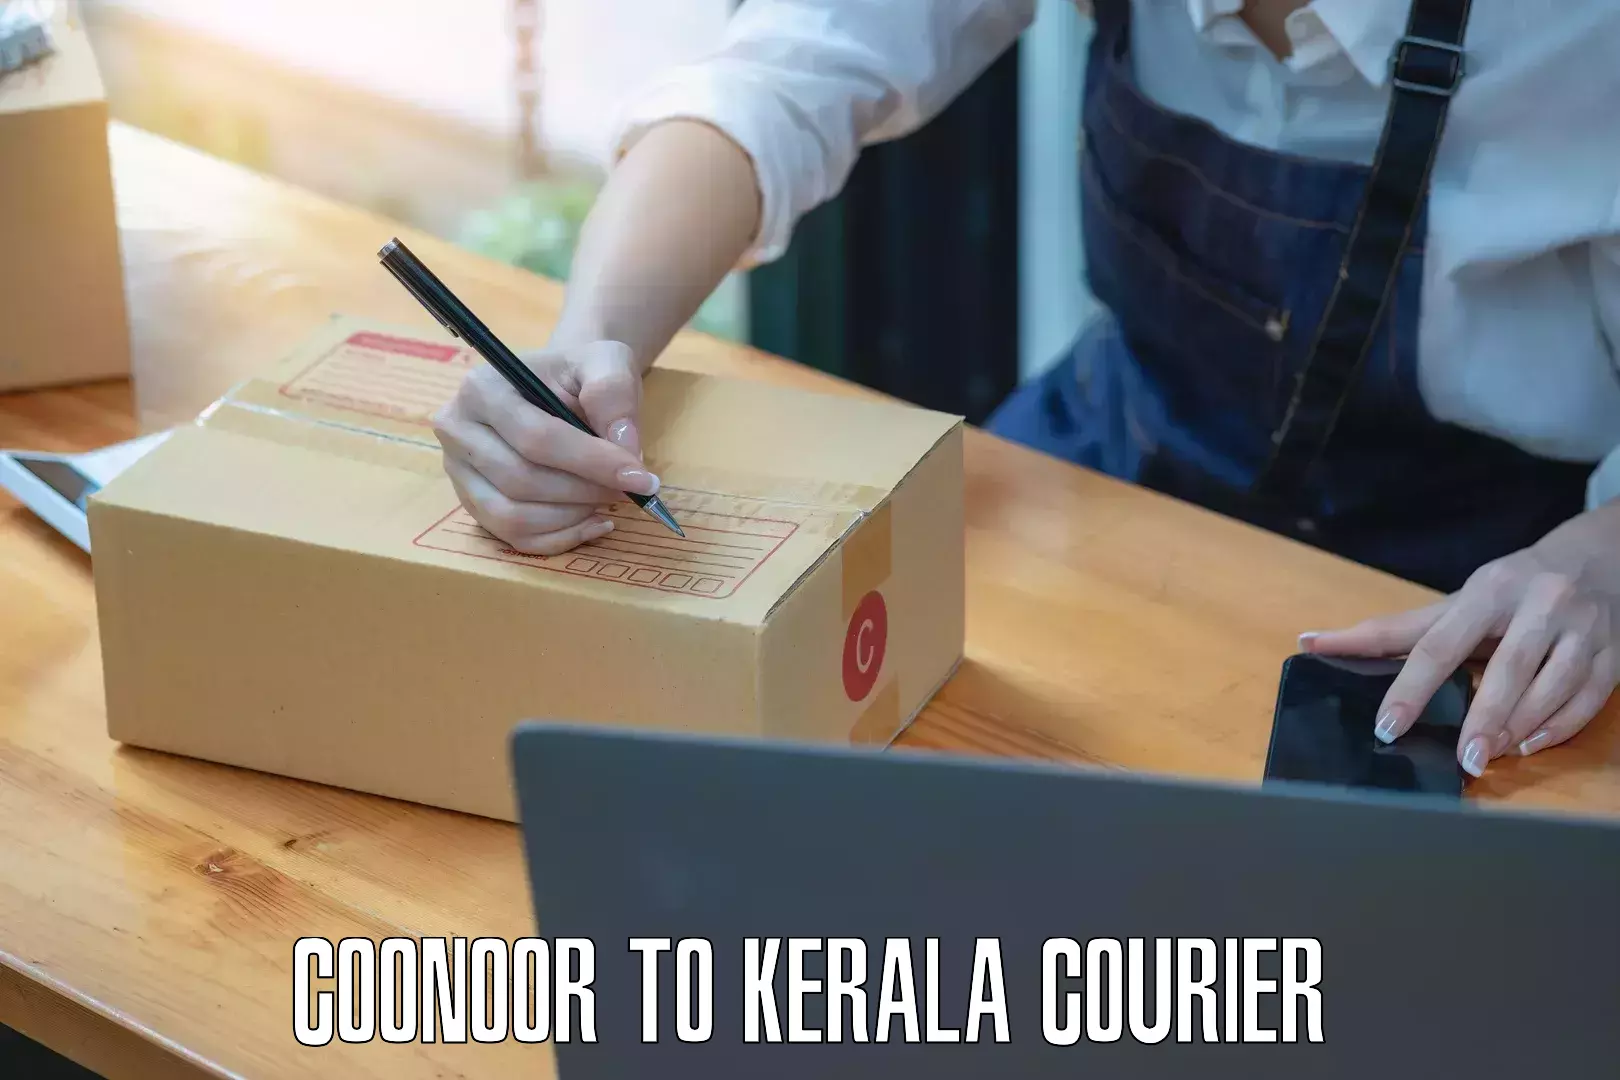 Subscription-based courier Coonoor to Wadakkanchery